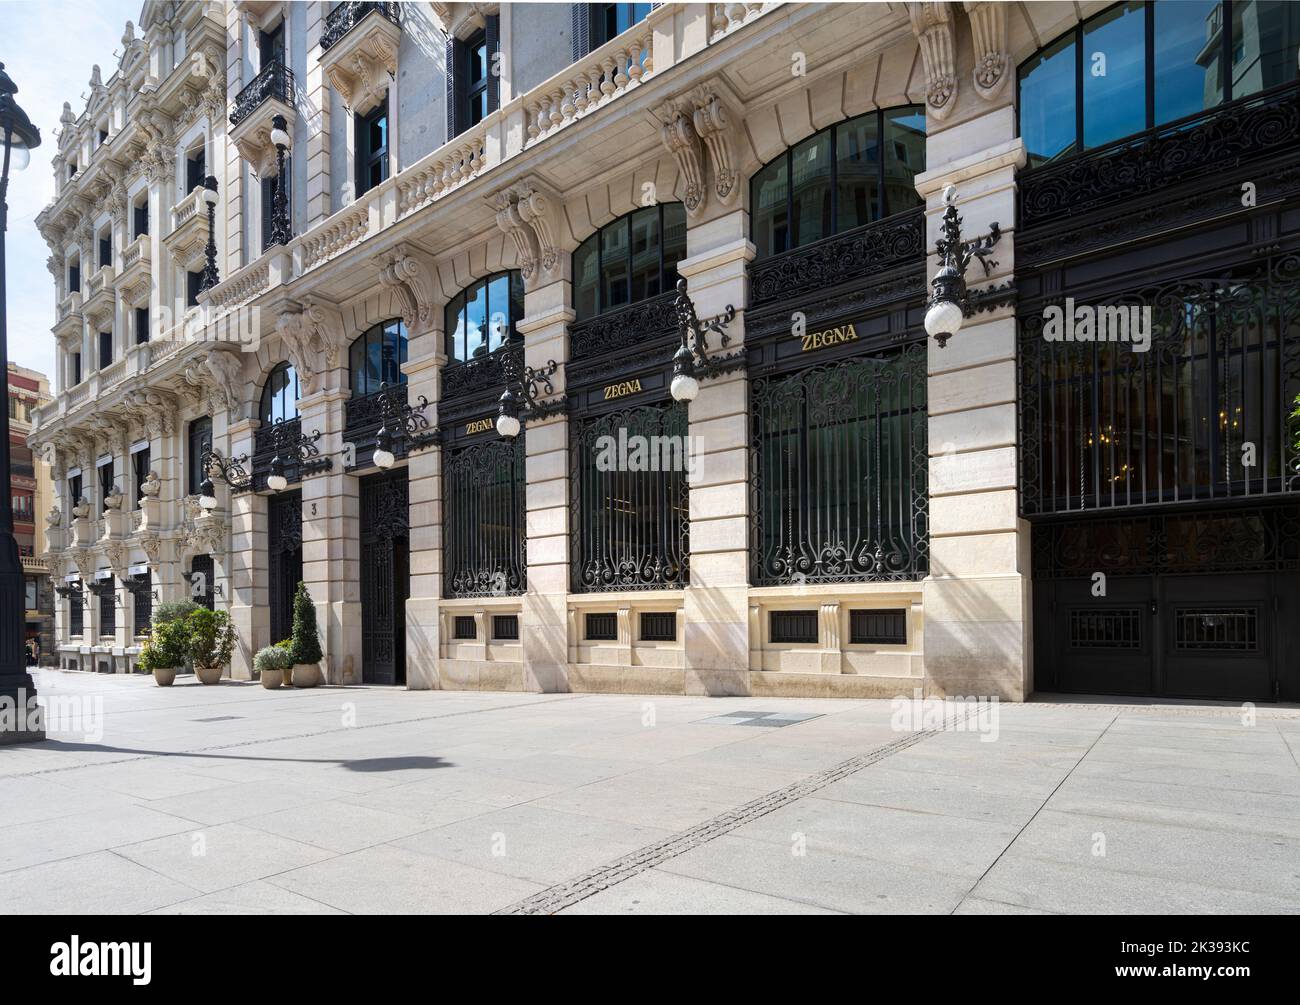 Madrid, Spain, September 2022.  External view of the Zegna brand store in the city center Stock Photo